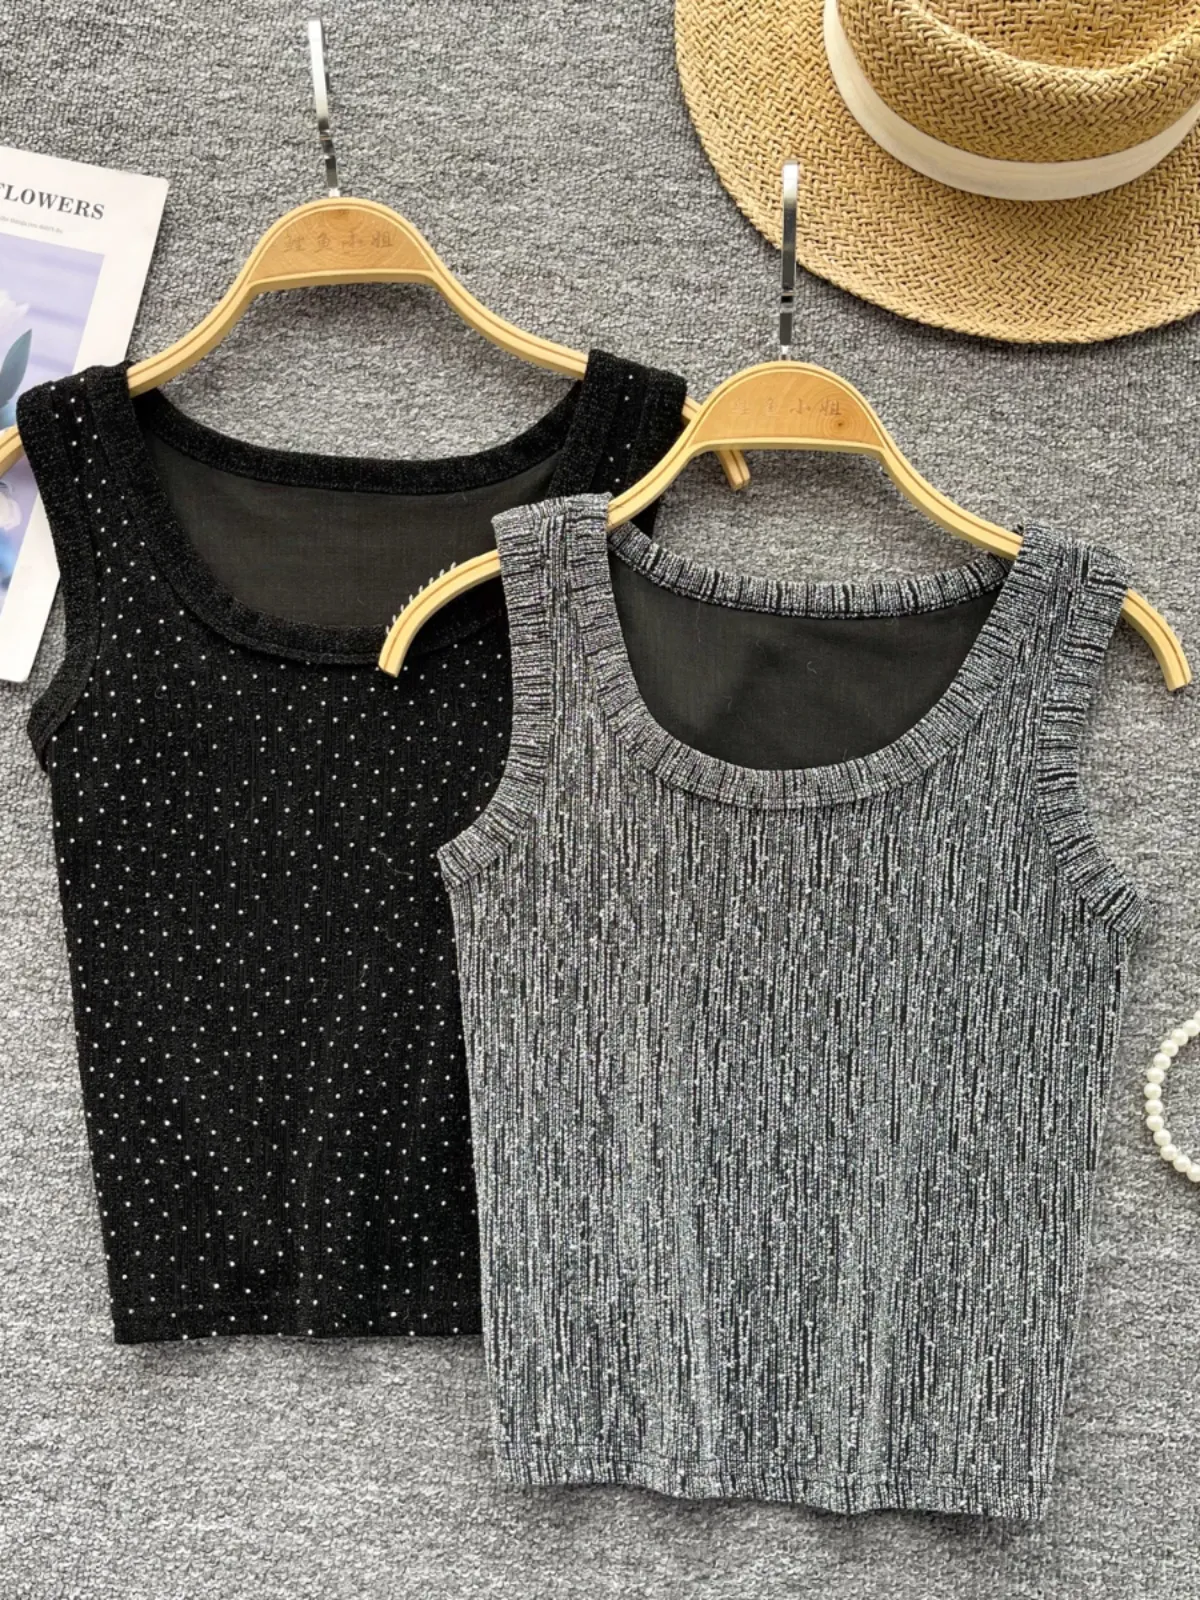 Summer New Versatile Sleeveless Tank Top for Women, Small and Popular Heavy Industry, Hot Rolled Diamond Round Neck Slim Fit T-shirt, Underlay Short Top Trendy